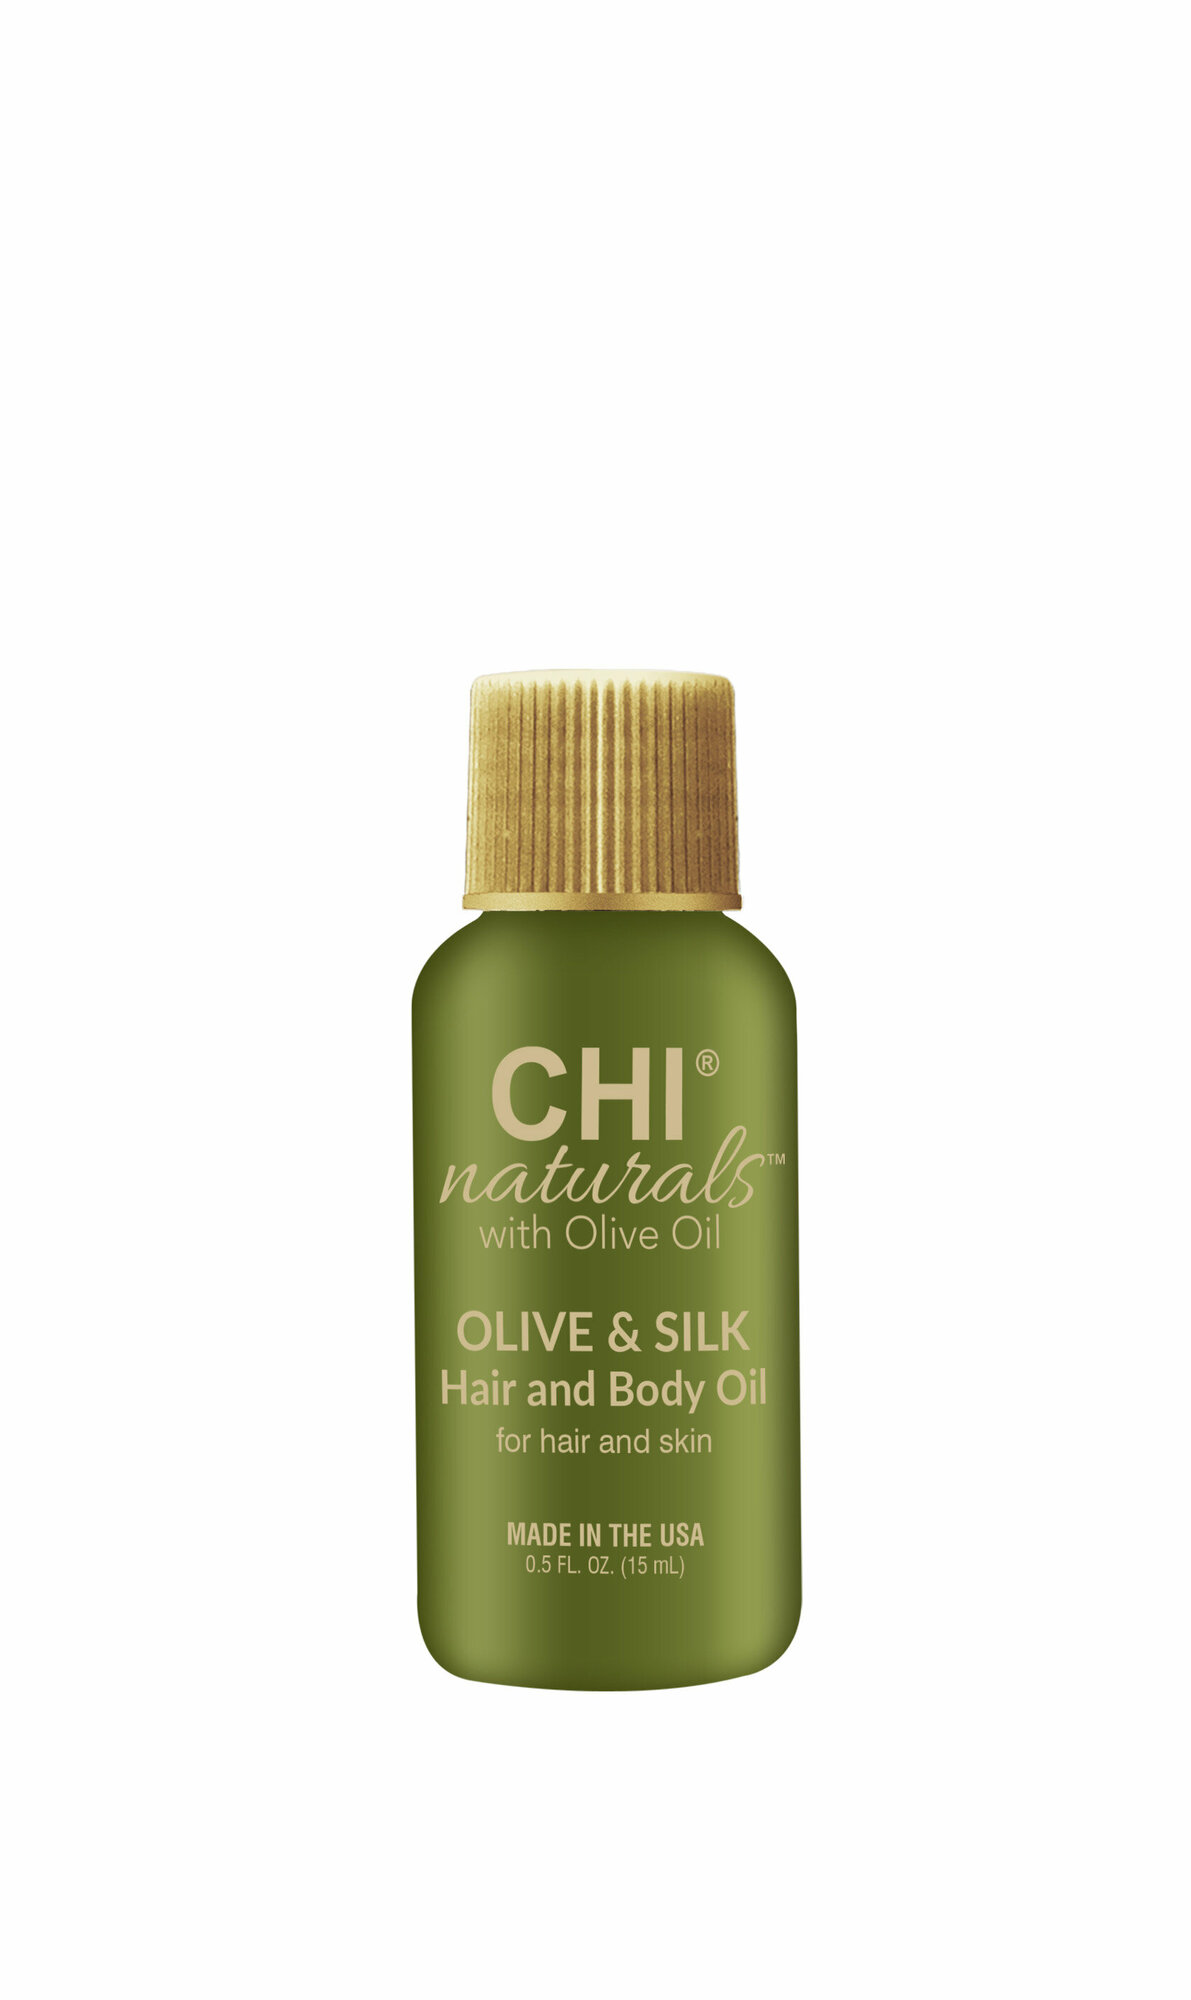 Масло для волос и тела Chi Naturals with Olive Oil Olive & Silk Hair & Body Oil 15 мл CHIOHB5